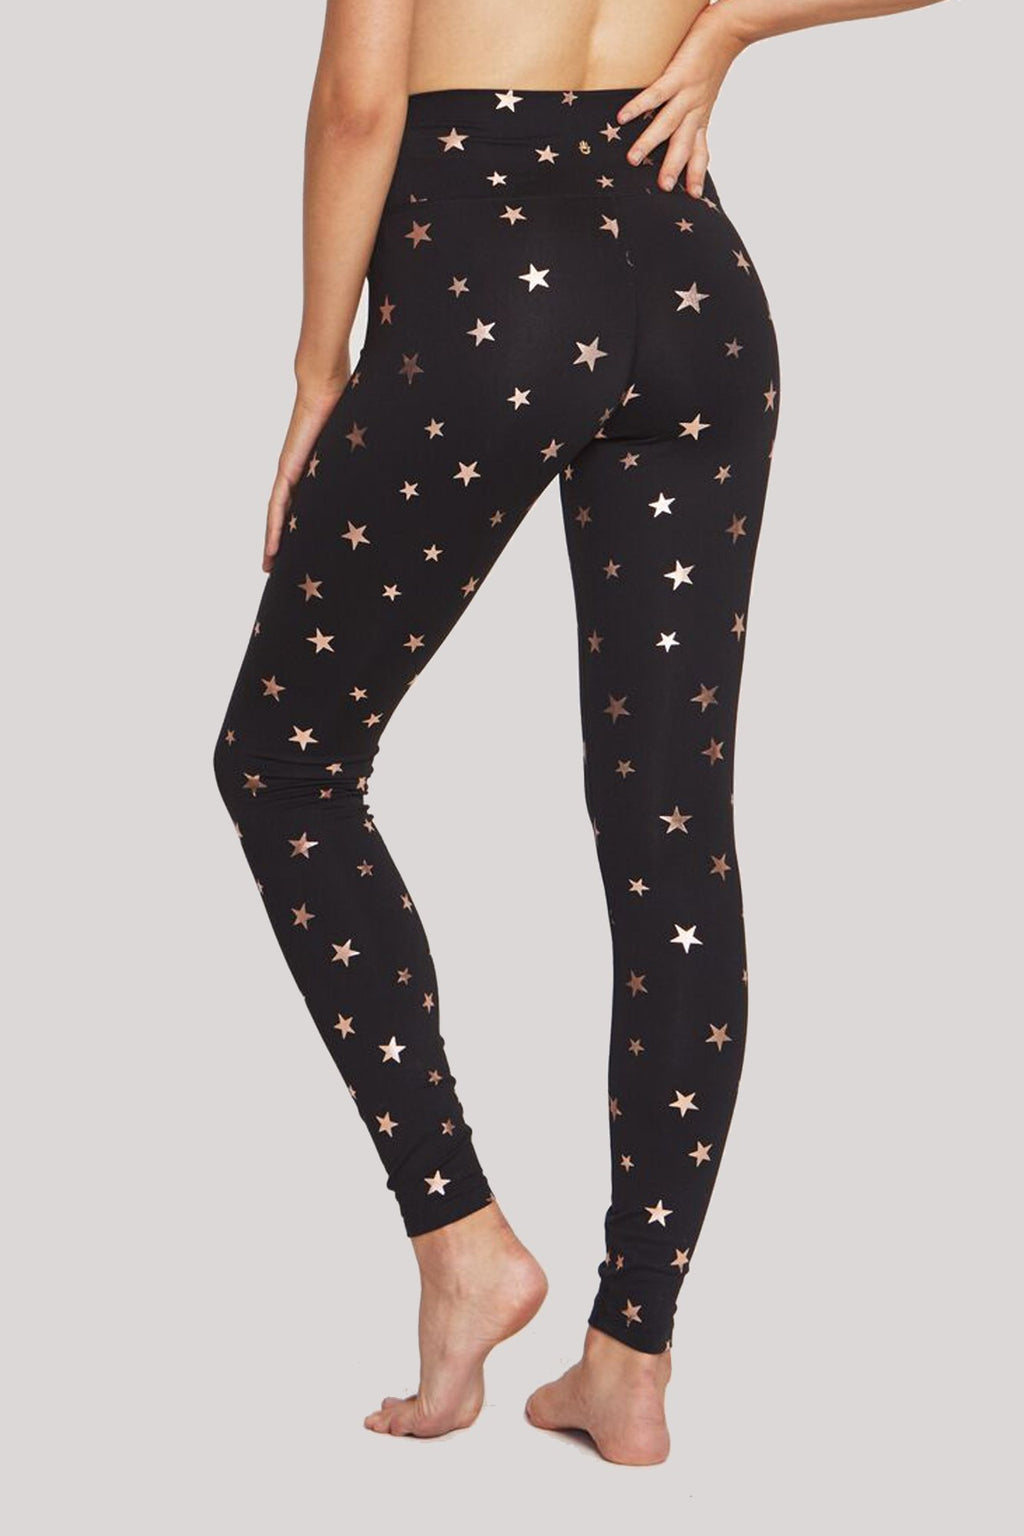 Spiritual Gangster Starry Vibes Perfect High Waisted 7/8 Legging